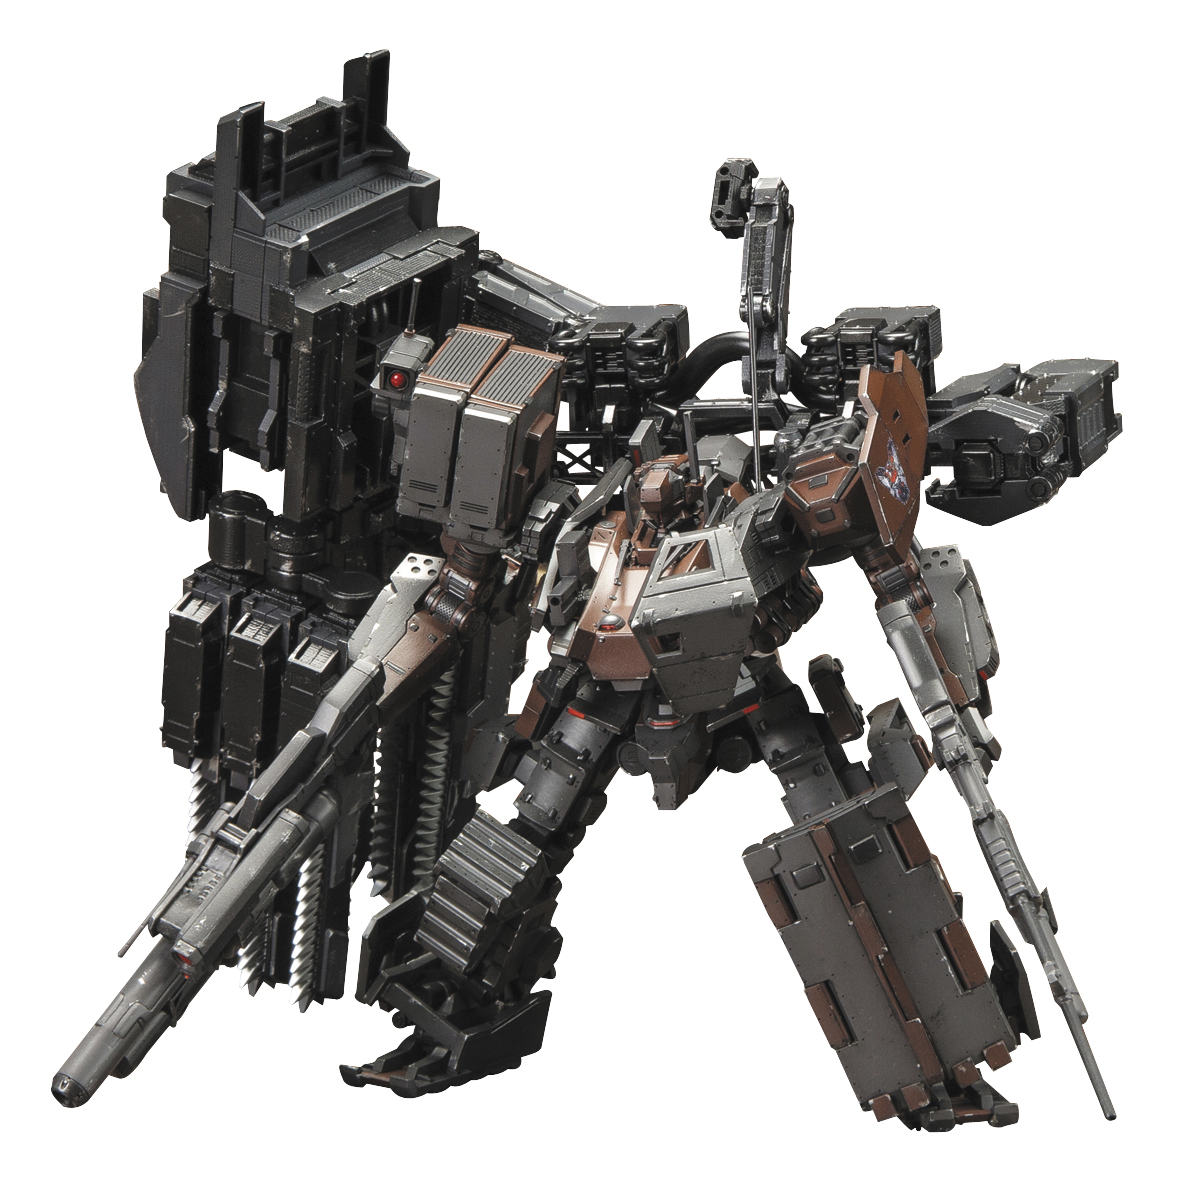 Armored Core V UCR-10/A (and Grind Blade)